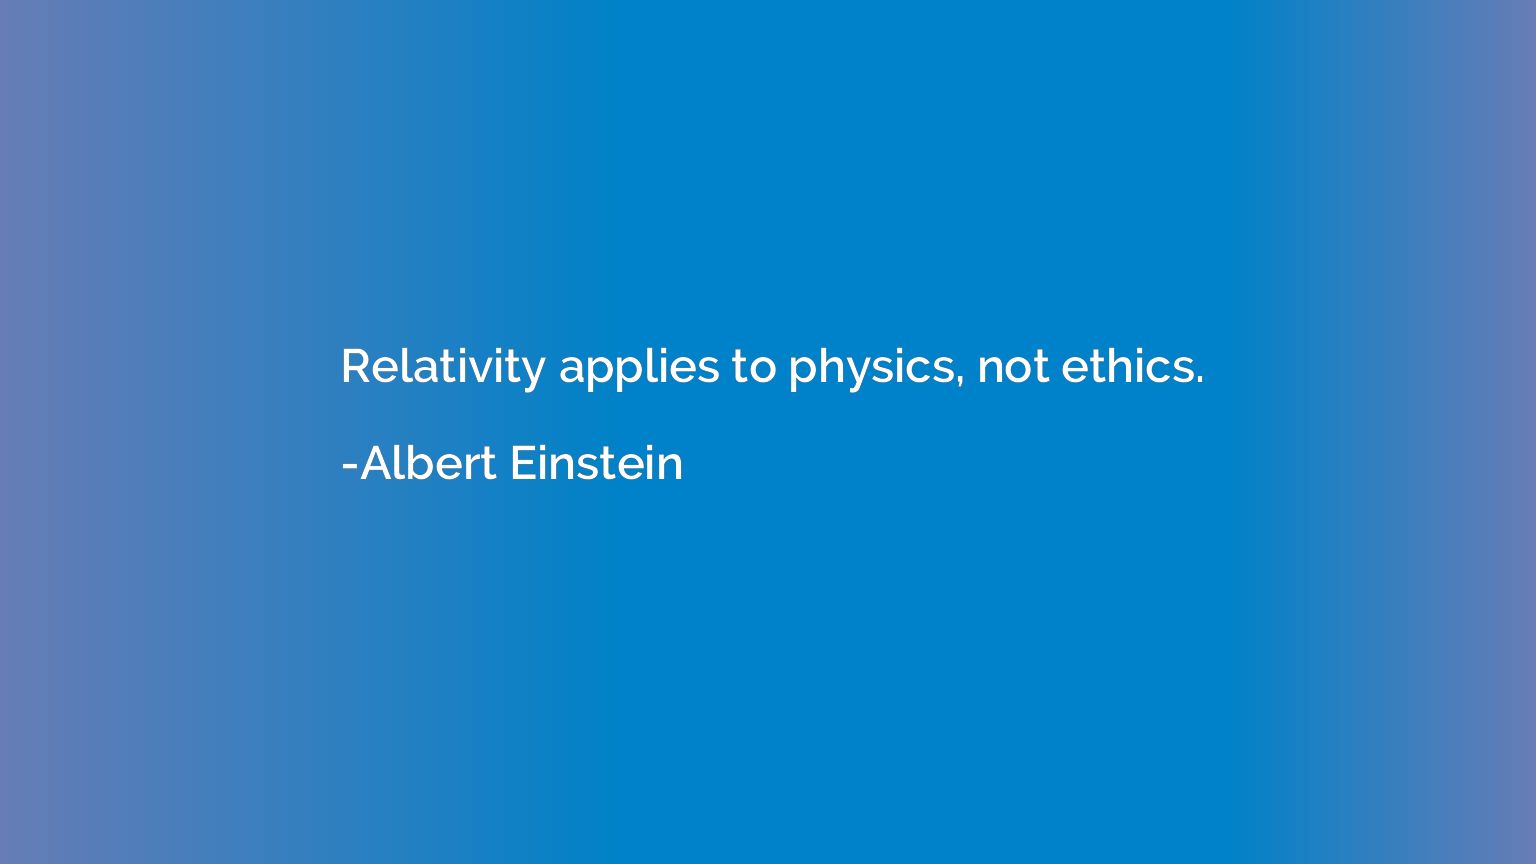 Relativity applies to physics, not ethics.